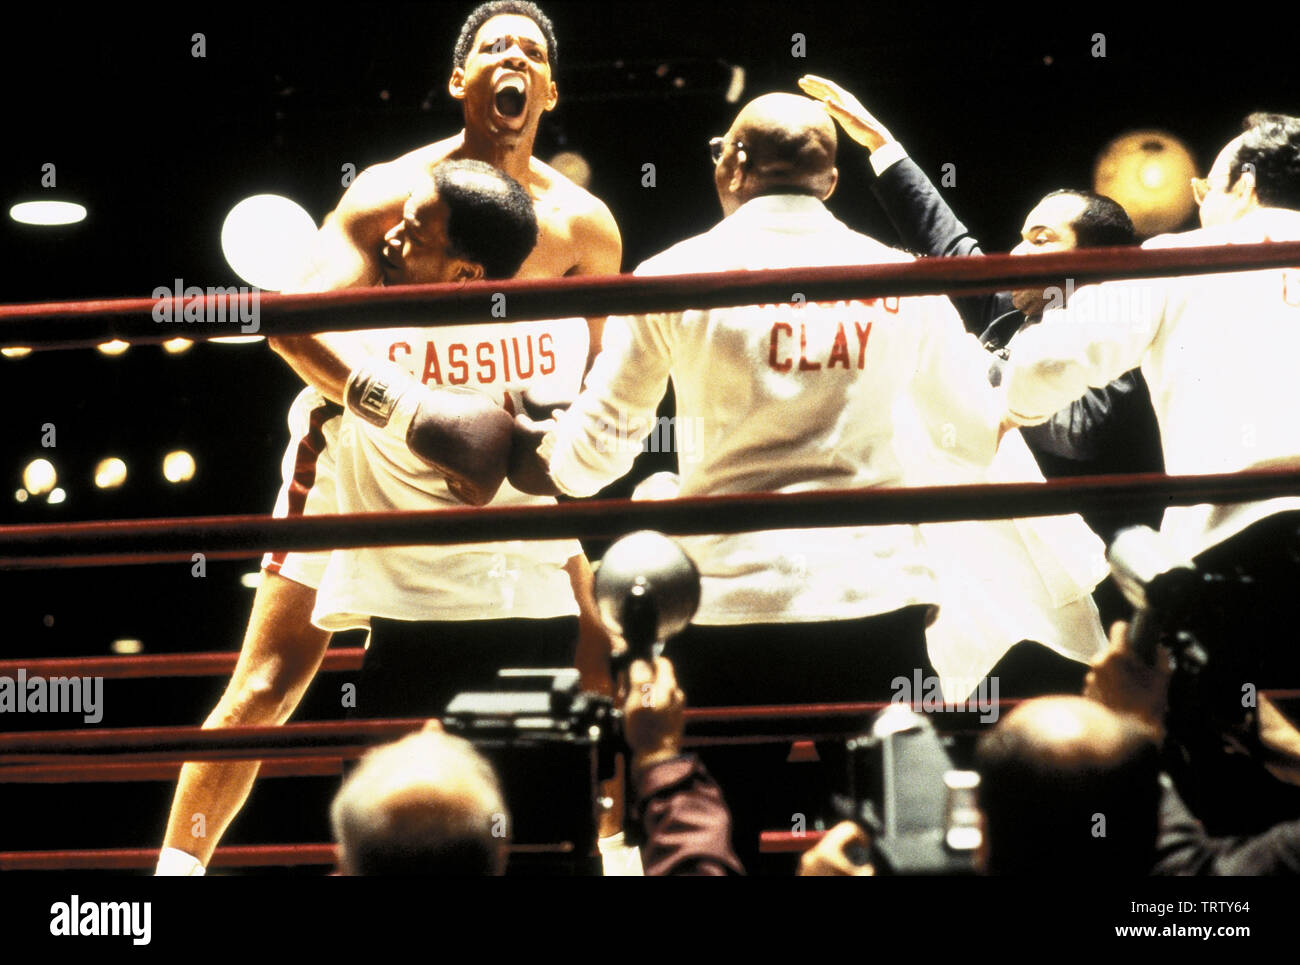 WILL SMITH in ALI (2001). Copyright: Editorial use only. No merchandising or book covers. This is a publicly distributed handout. Access rights only, no license of copyright provided. Only to be reproduced in conjunction with promotion of this film. Credit: COLUMBIA PICTURES / CONNOR, FRANK / Album Stock Photo